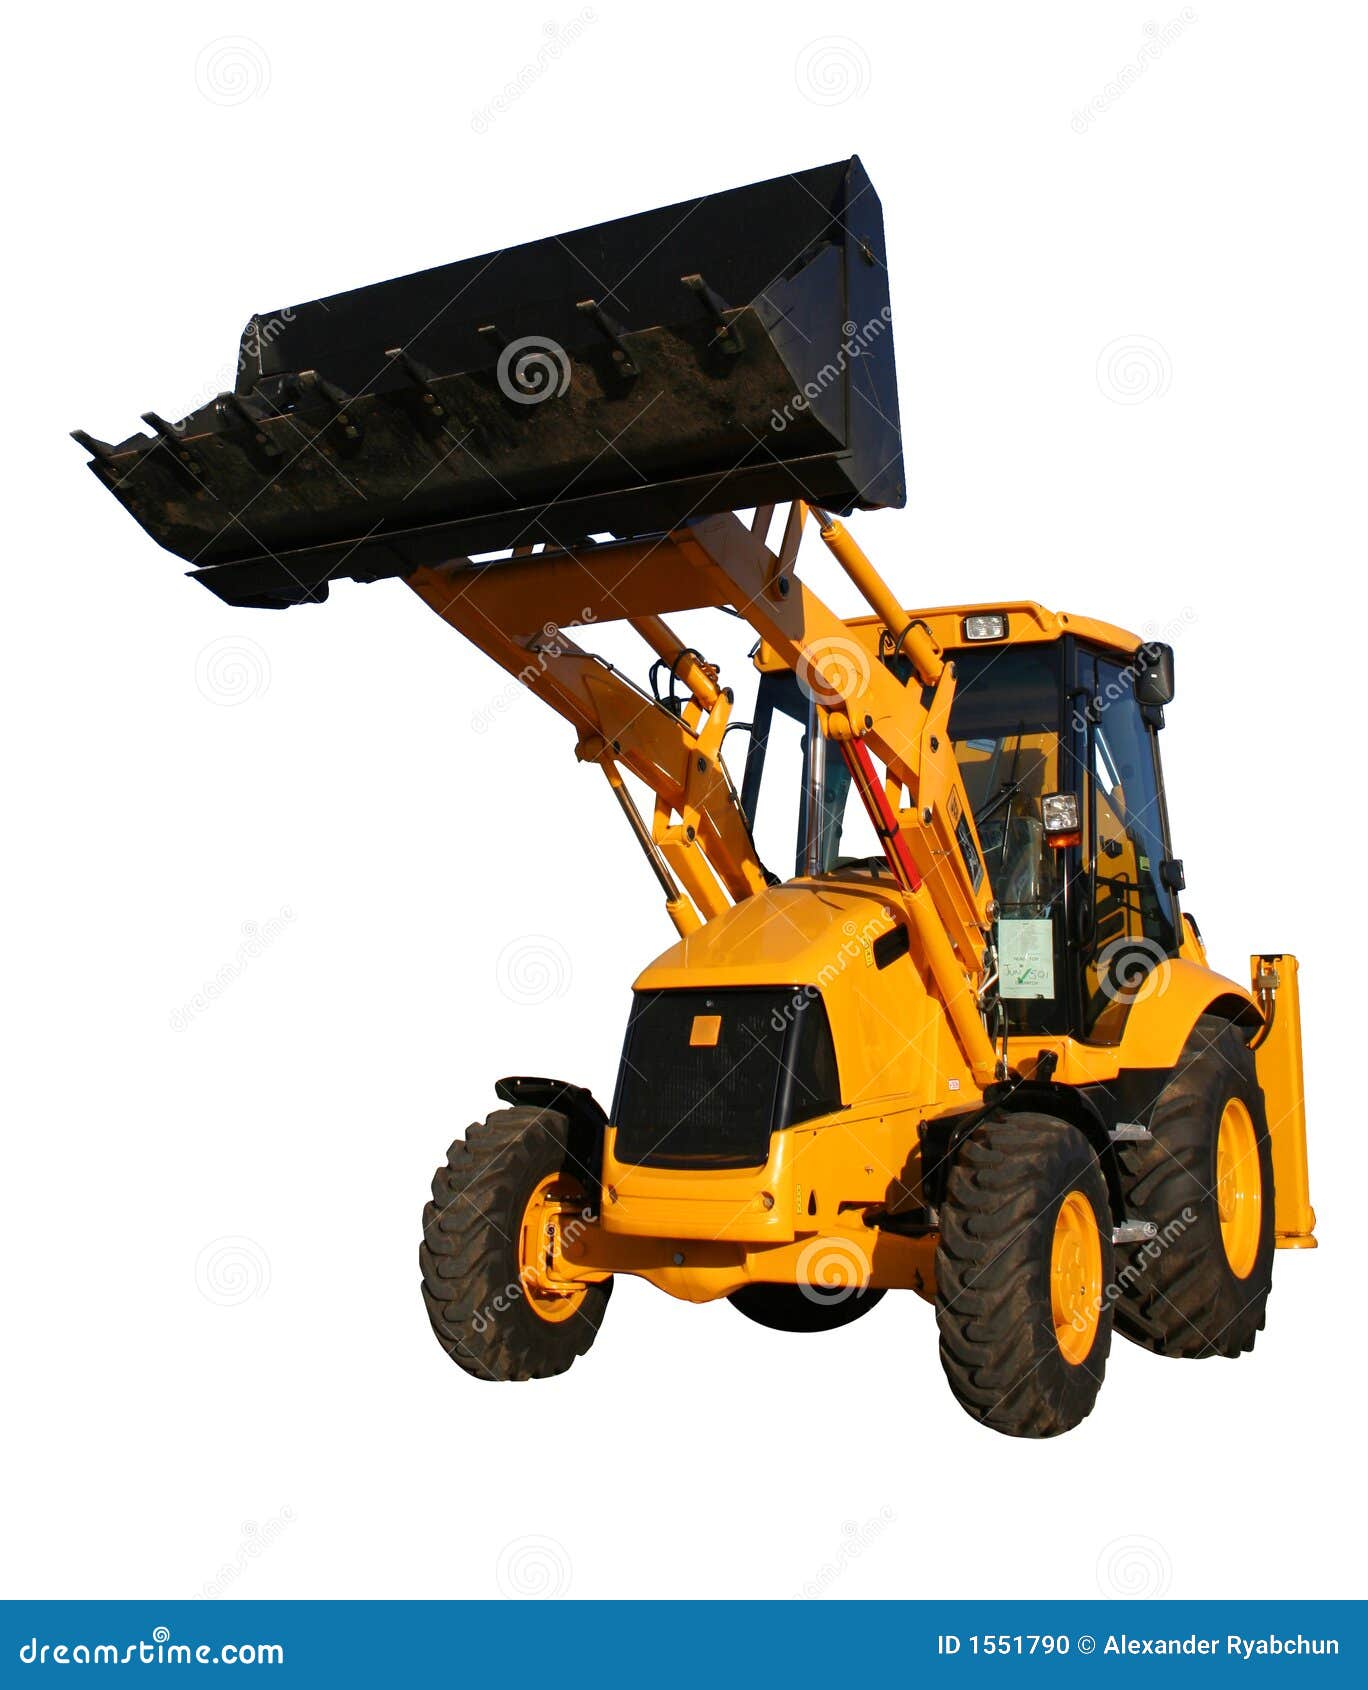 The New Bulldozer Of Yellow Color With The Lifted Bucket Stock Photo Image Of Excavator